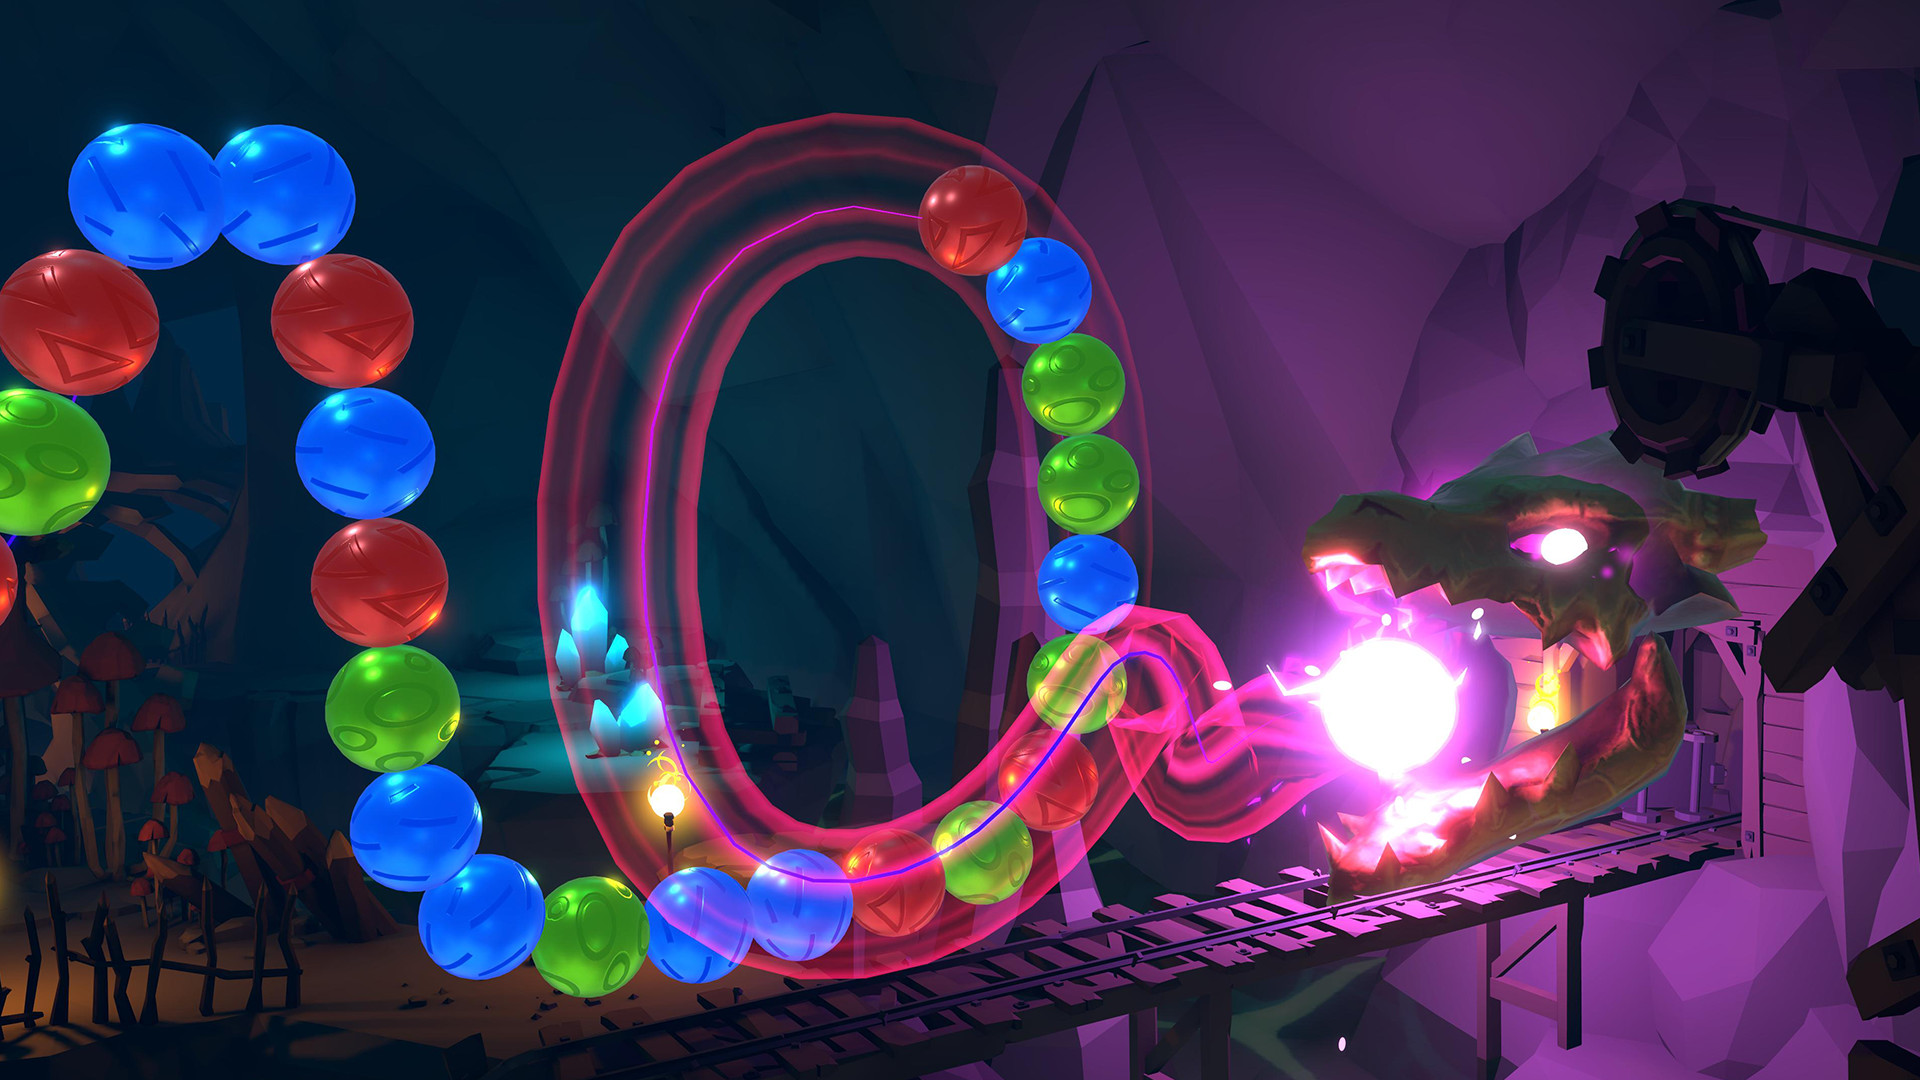 Zooma - Chapter 2 DLC - "Cave" Featured Screenshot #1